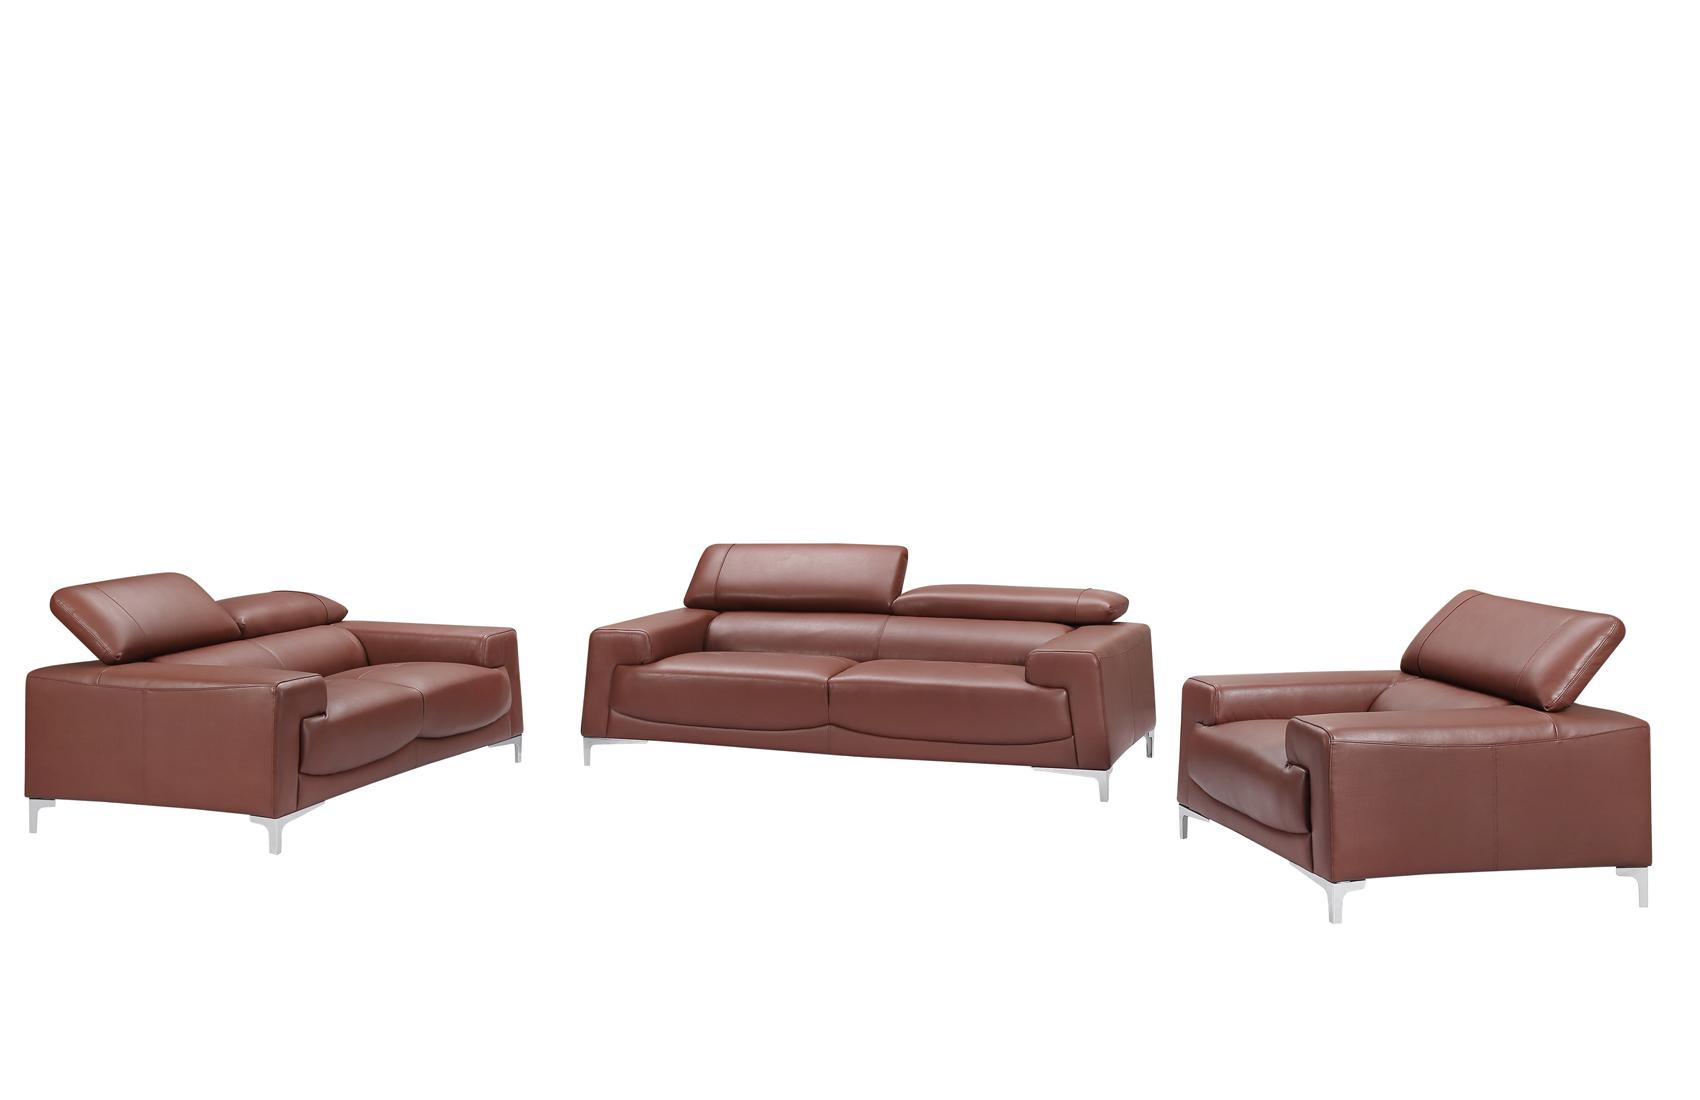 

    
ESF 2537 Sofa Loveseat and Chair Set Brown/Saddle ESF 2537-Sofa Set-3
